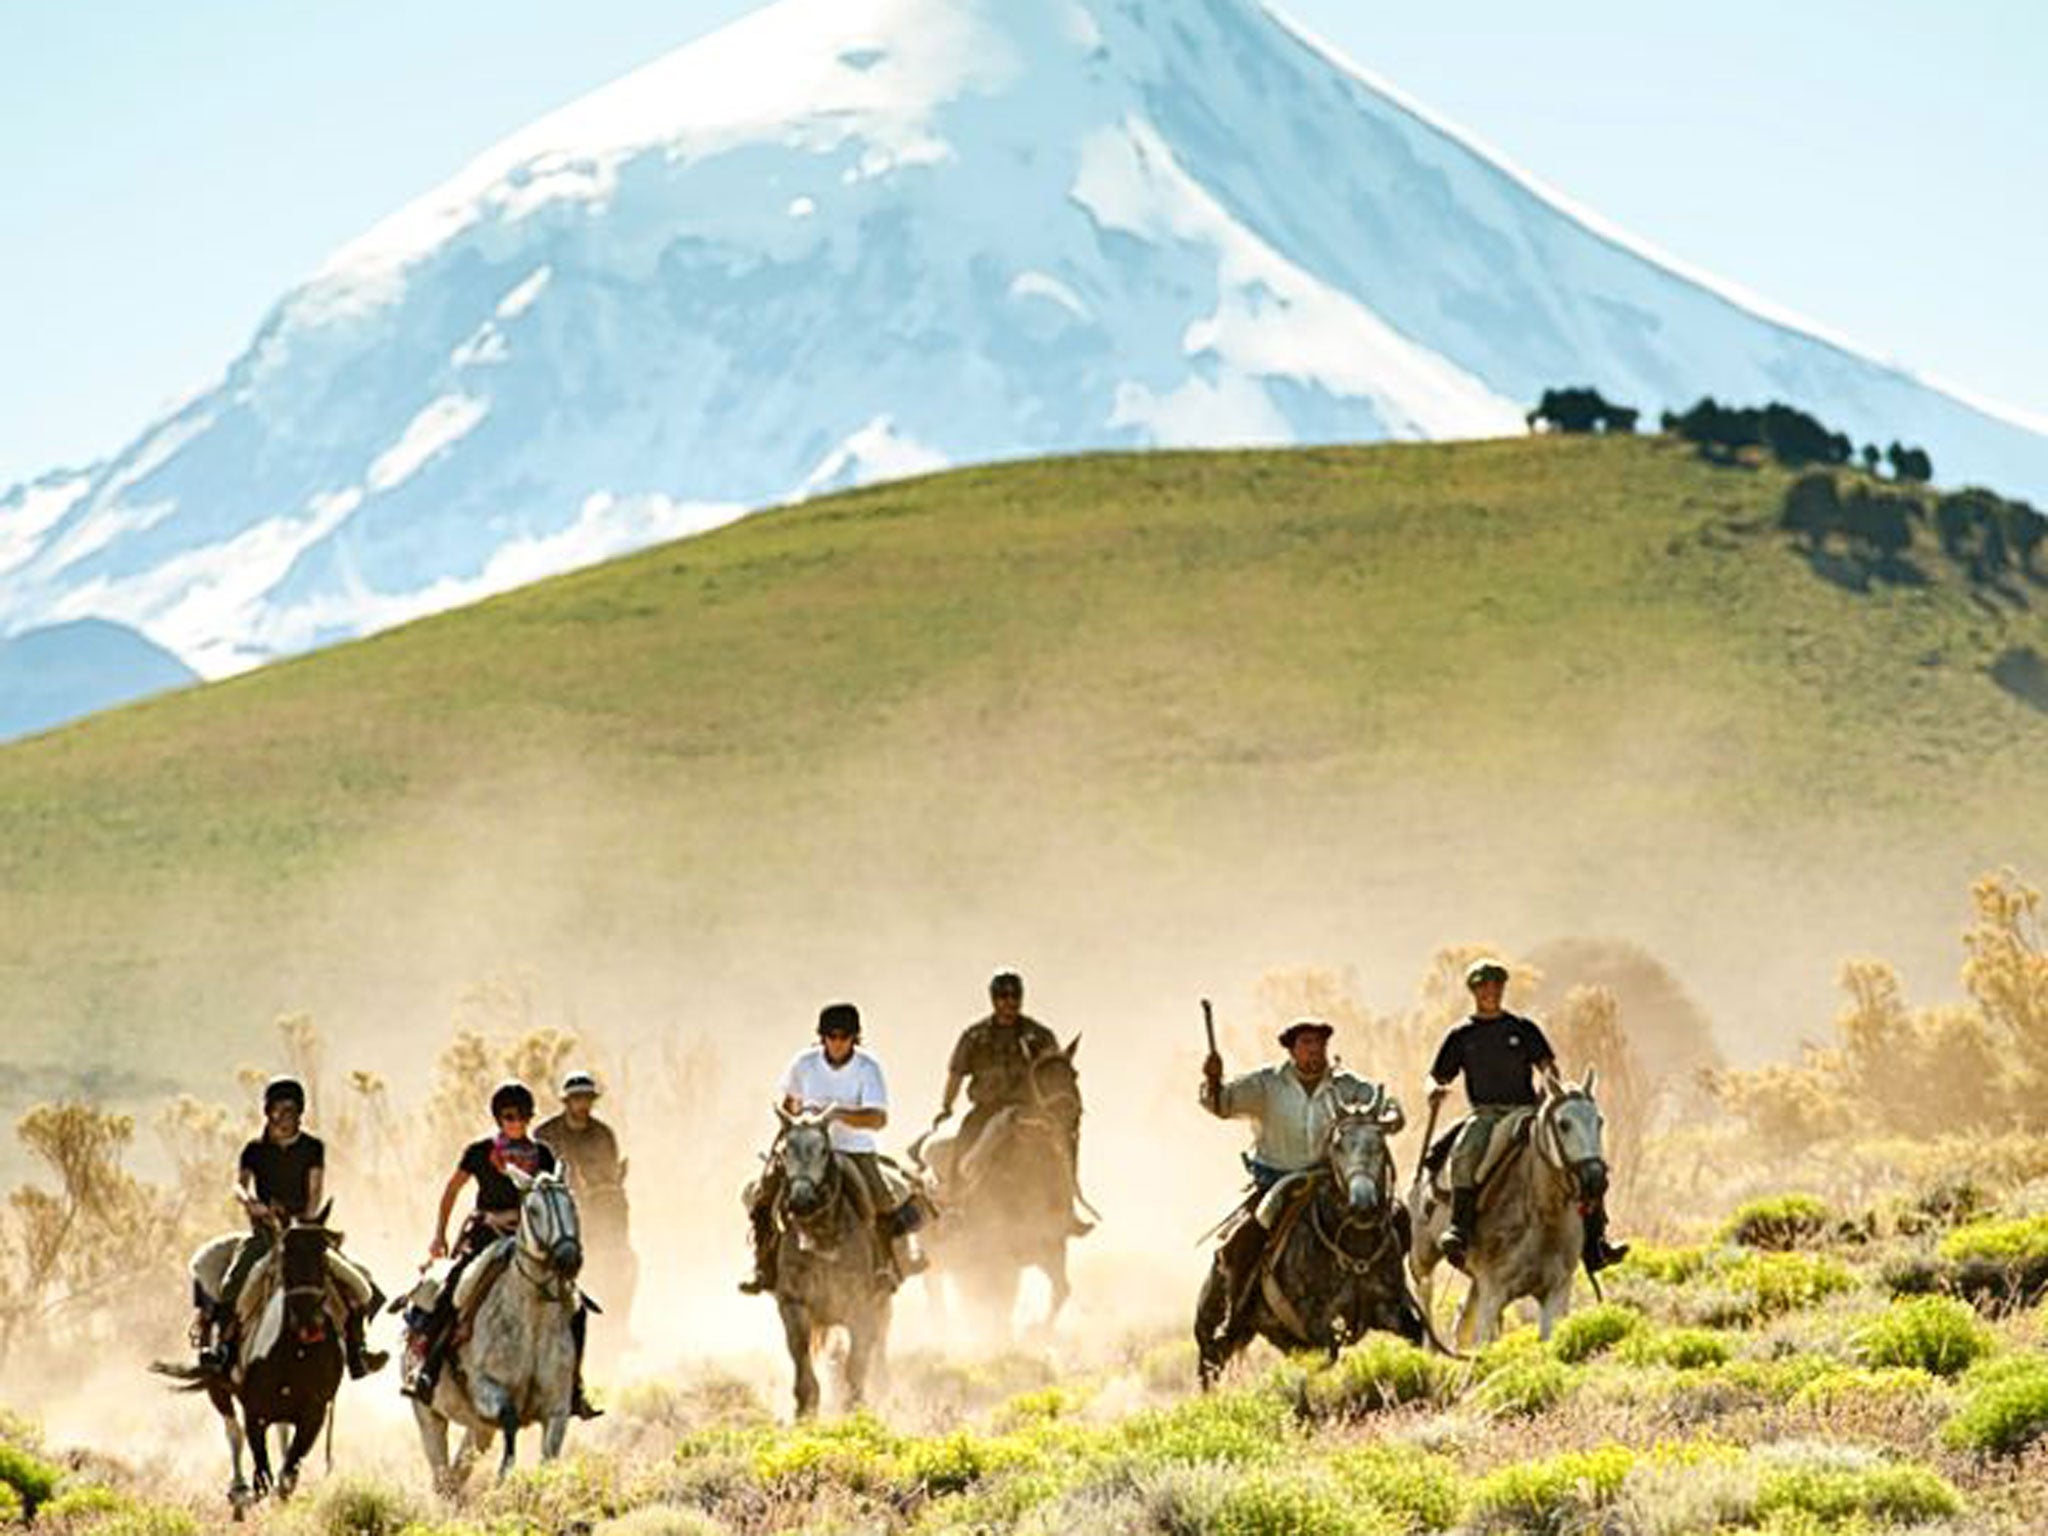 On the hoof: riding with gauchos in Argentina